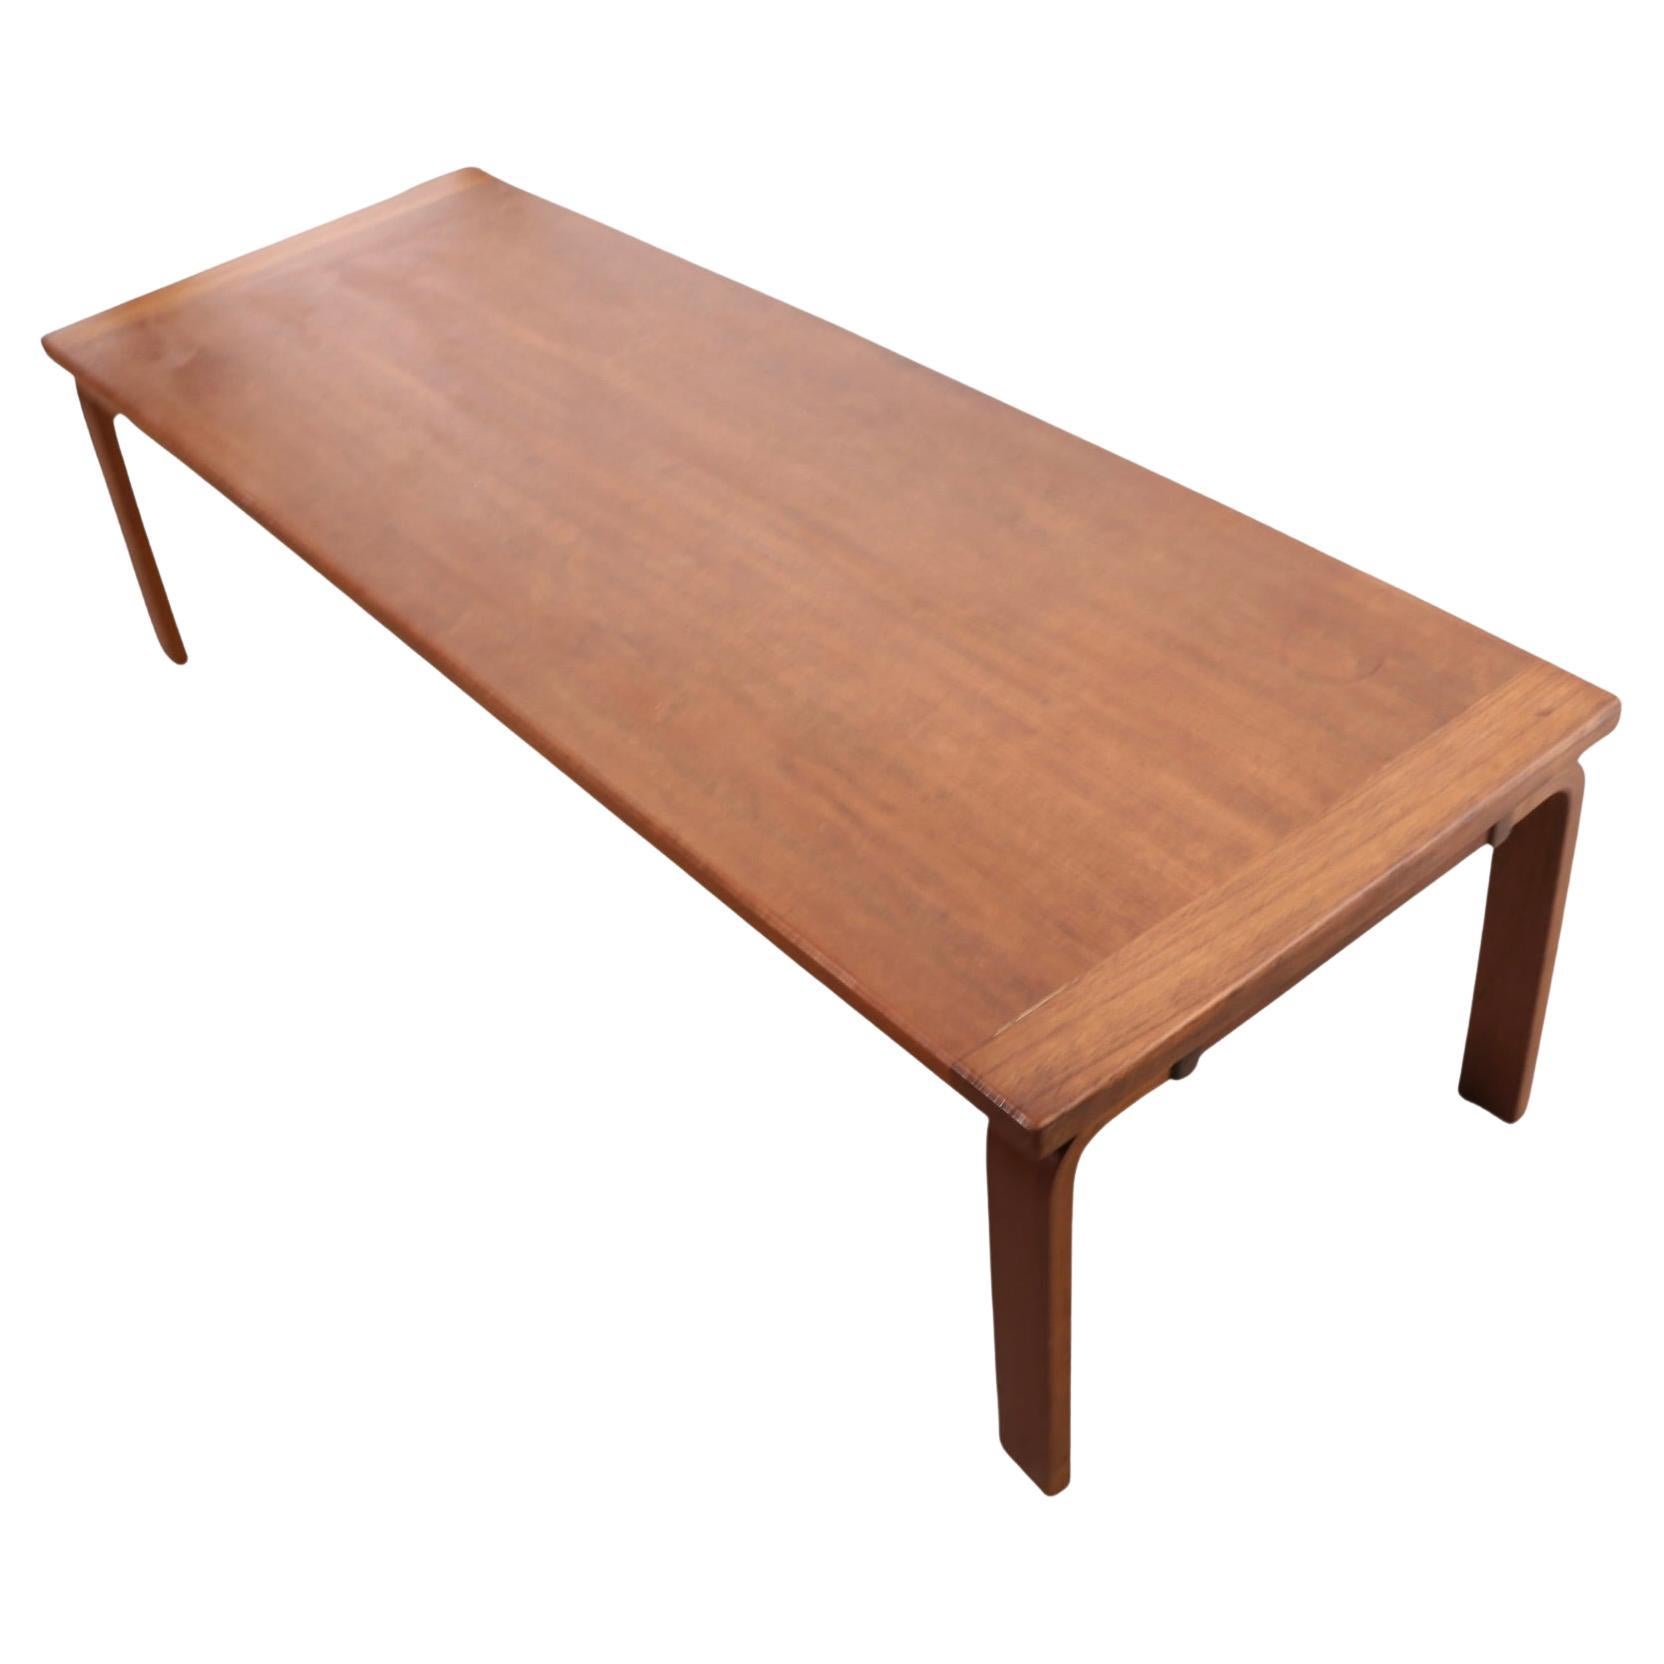 Mid Century Teak Coffee Table by Westnofa Made in Norway, C 1960/1970s For Sale